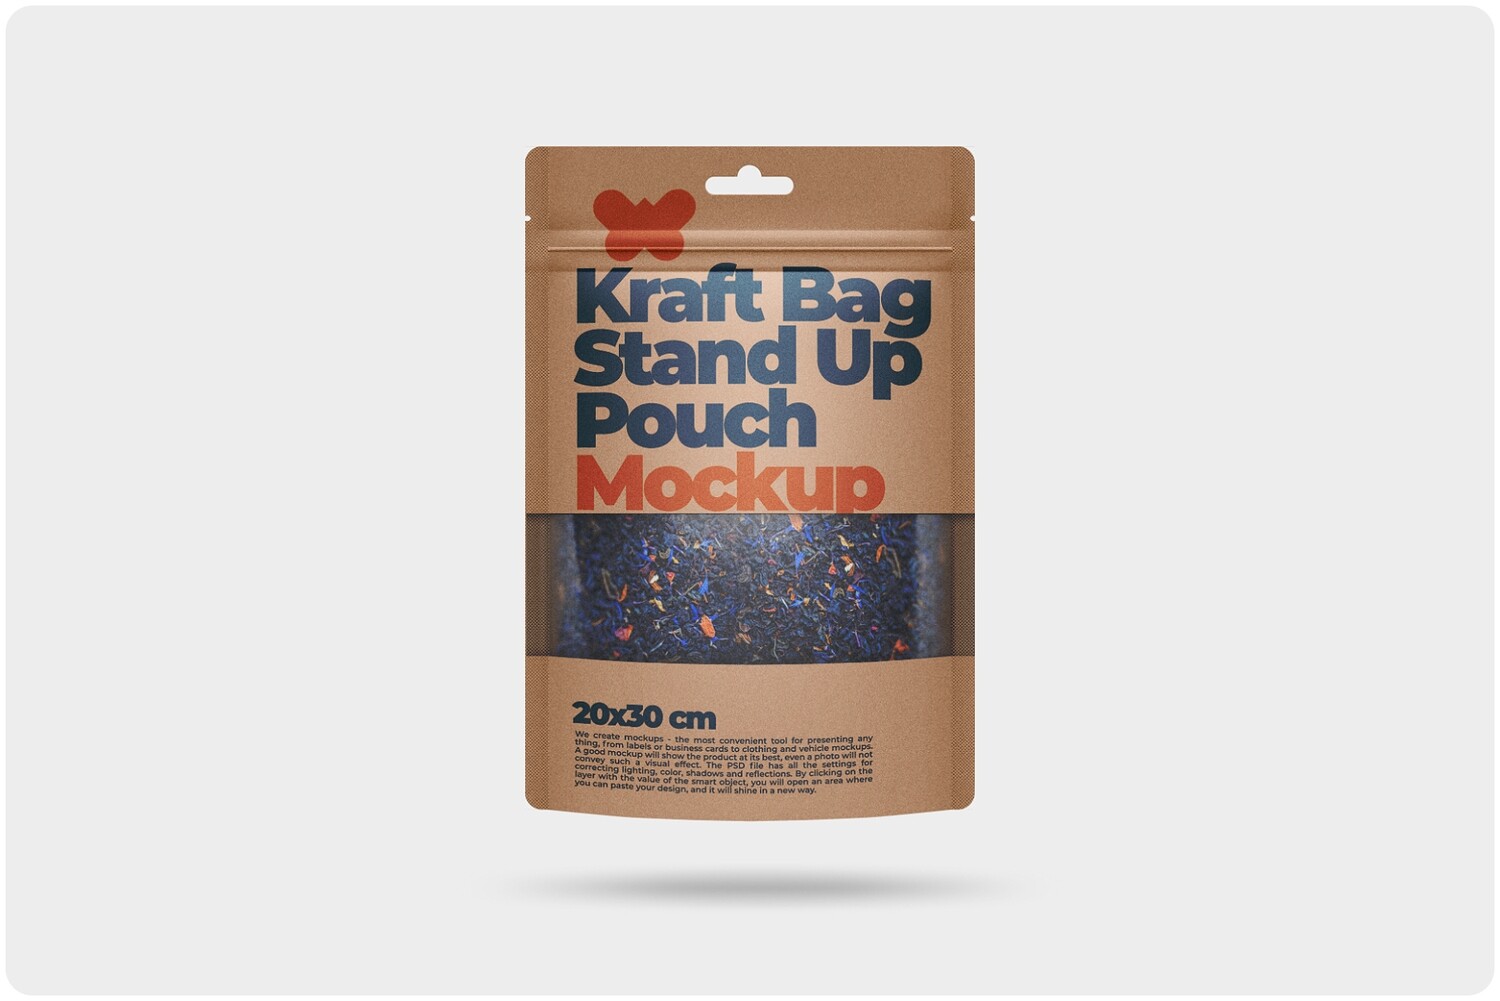 Kraft Bag Stand Up Pouch Doypack with Clear Window Mockup 7x11,8in (20x30cm)